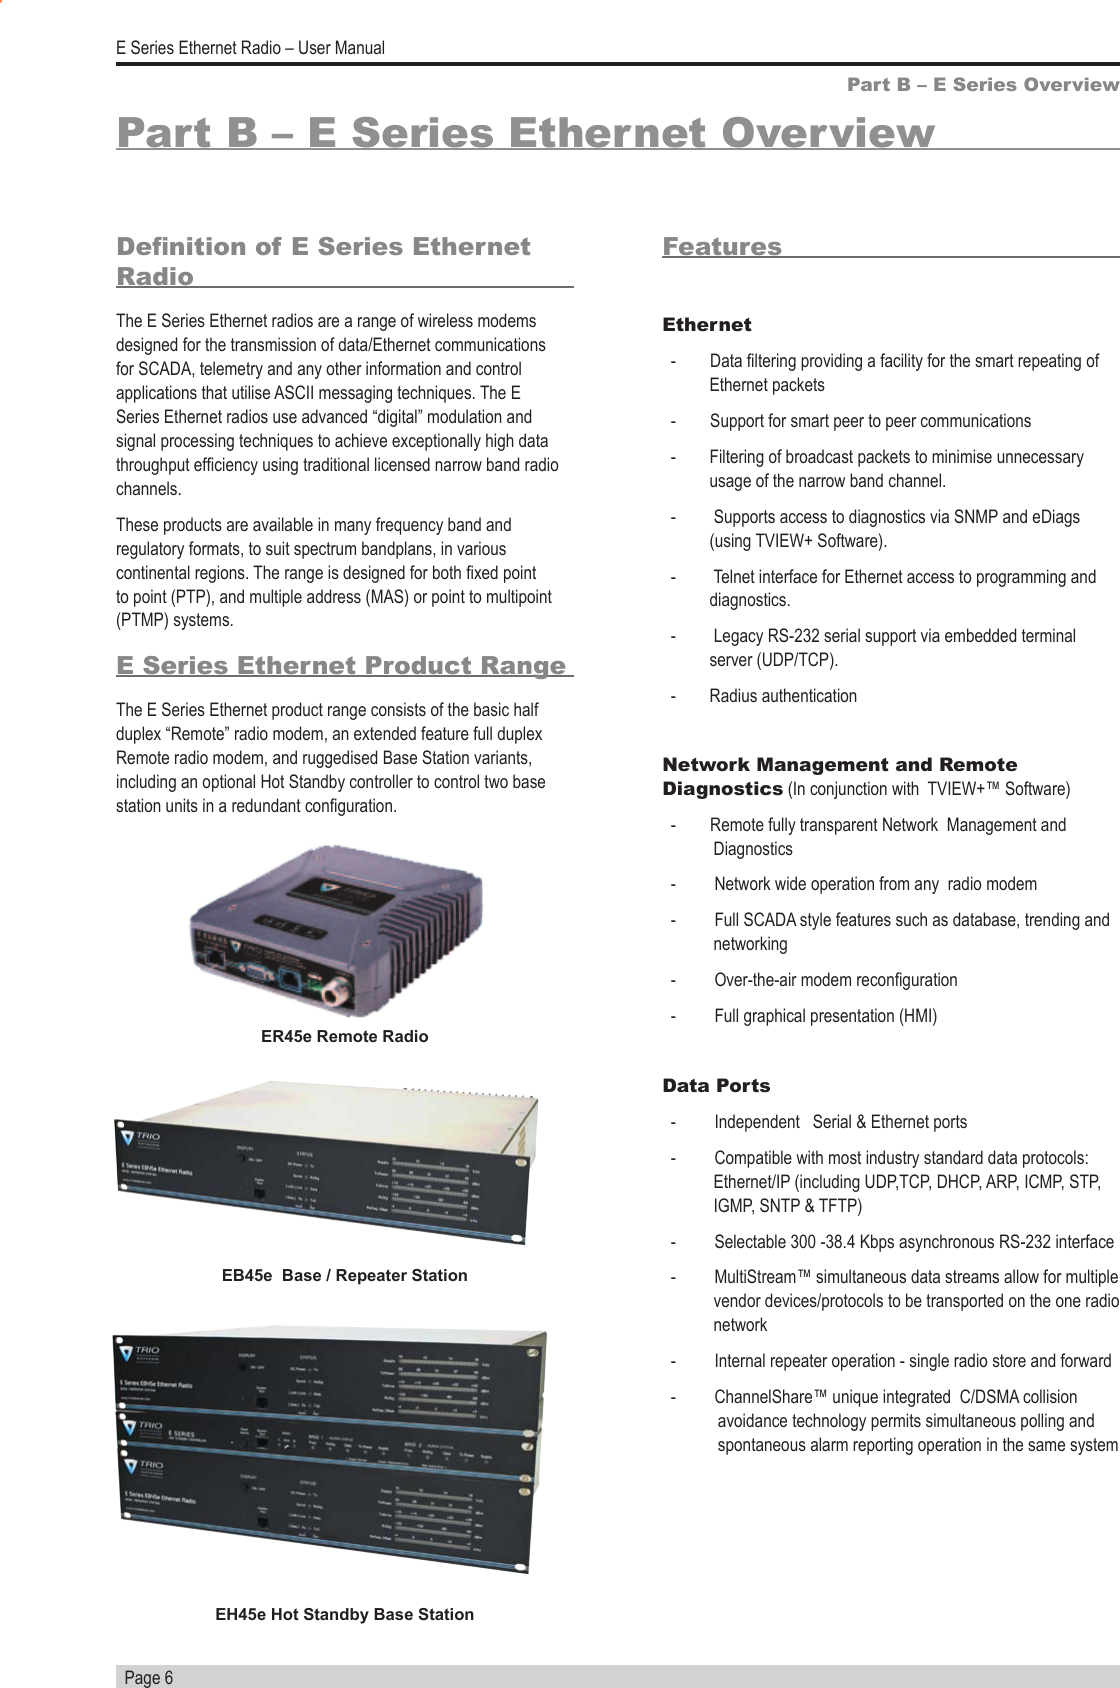   Page 6E Series Ethernet Radio – User ManualPart B – E Series Ethernet OverviewDenition of E Series Ethernet RadioThe E Series Ethernet radios are a range of wireless modems designed for the transmission of data/Ethernet communications for SCADA, telemetry and any other information and control applications that utilise ASCII messaging techniques. The E Series Ethernet radios use advanced “digital” modulation and signal processing techniques to achieve exceptionally high data throughput efciency using traditional licensed narrow band radio channels. These products are available in many frequency band and regulatory formats, to suit spectrum bandplans, in various continental regions. The range is designed for both xed point to point (PTP), and multiple address (MAS) or point to multipoint (PTMP) systems.E Series Ethernet Product RangeThe E Series Ethernet product range consists of the basic half duplex “Remote” radio modem, an extended feature full duplex Remote radio modem, and ruggedised Base Station variants, including an optional Hot Standby controller to control two base station units in a redundant conguration.Part B – E Series OverviewFeaturesEthernet  -        Data ltering providing a facility for the smart repeating of Ethernet packets   -        Support for smart peer to peer communications   -   Filtering of broadcast packets to minimise unnecessary usage of the narrow band channel.    -   Supports access to diagnostics via SNMP and eDiags (using TVIEW+ Software).  -   Telnet interface for Ethernet access to programming and diagnostics.   -   Legacy RS-232 serial support via embedded terminal  server (UDP/TCP).  -   Radius authenticationNetwork Management and Remote Diagnostics (In conjunction with  TVIEW+™ Software)  -        Remote fully transparent Network  Management and                Diagnostics  -         Network wide operation from any  radio modem  -         Full SCADA style features such as database, trending and                              networking  -         Over-the-air modem reconguration  -         Full graphical presentation (HMI)Data Ports  -         Independent   Serial &amp; Ethernet ports  -         Compatible with most industry standard data protocols:                                 Ethernet/IP  (including  UDP,TCP,  DHCP,  ARP,  ICMP,  STP,                                                 IGMP, SNTP &amp; TFTP)  -         Selectable 300 -38.4 Kbps asynchronous RS-232 interface  -         MultiStream™ simultaneous data streams allow for multiple                     vendor devices/protocols to be transported on the one radio                network  -         Internal repeater operation - single radio store and forward  -         ChannelShare™ unique integrated  C/DSMA collision                         avoidance technology permits simultaneous polling and                     spontaneous alarm reporting operation in the same systemER45e Remote RadioEB45e  Base / Repeater StationEH45e Hot Standby Base Station